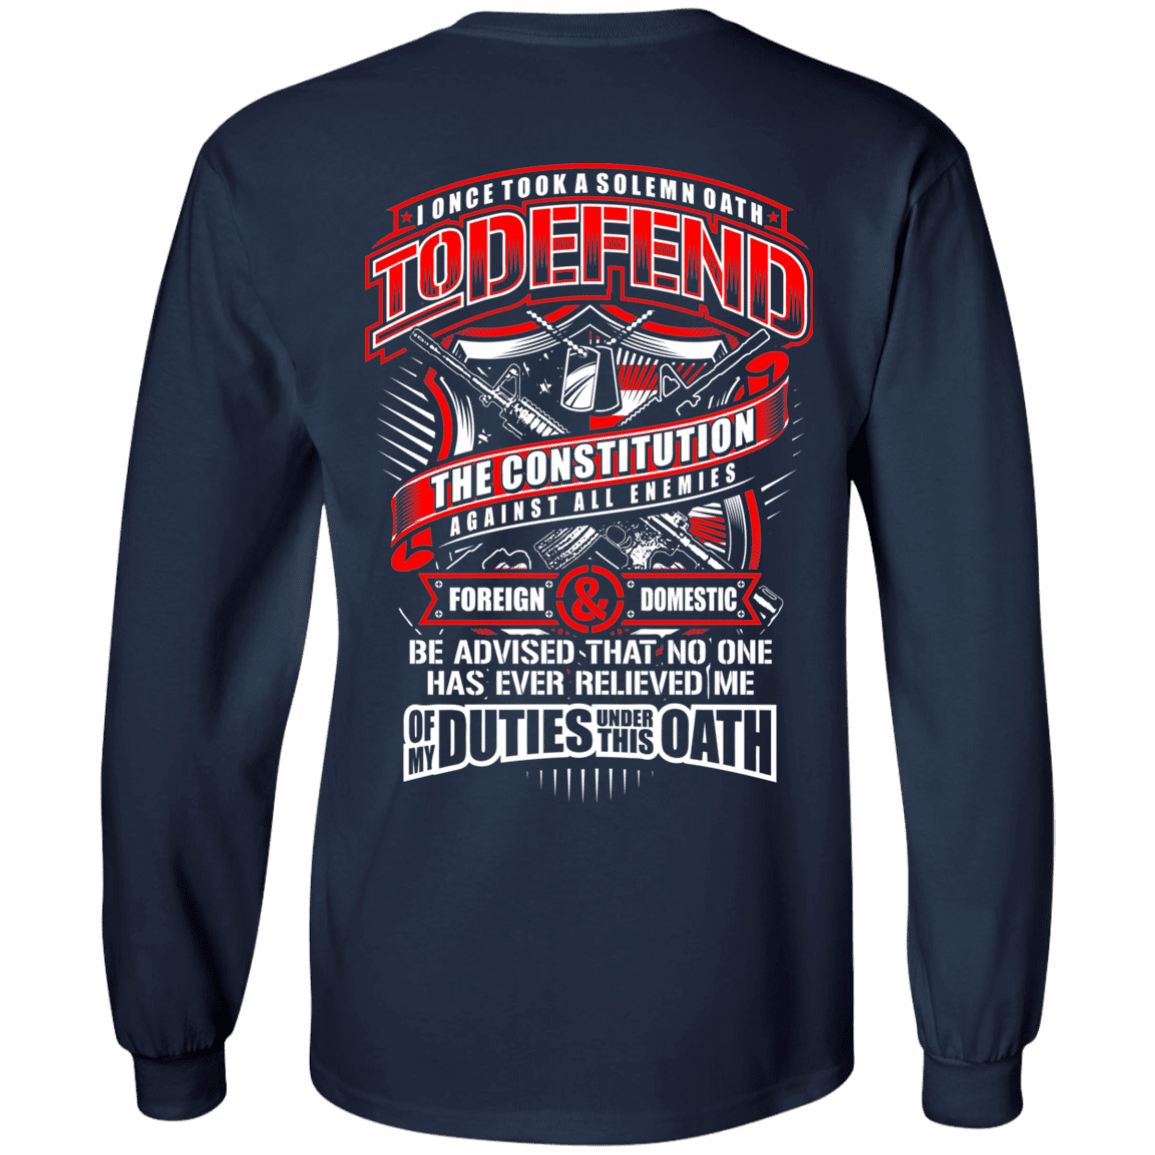 Military T-Shirt "My Oath To Defend The Constitution Veteran" Men Back-TShirt-General-Veterans Nation